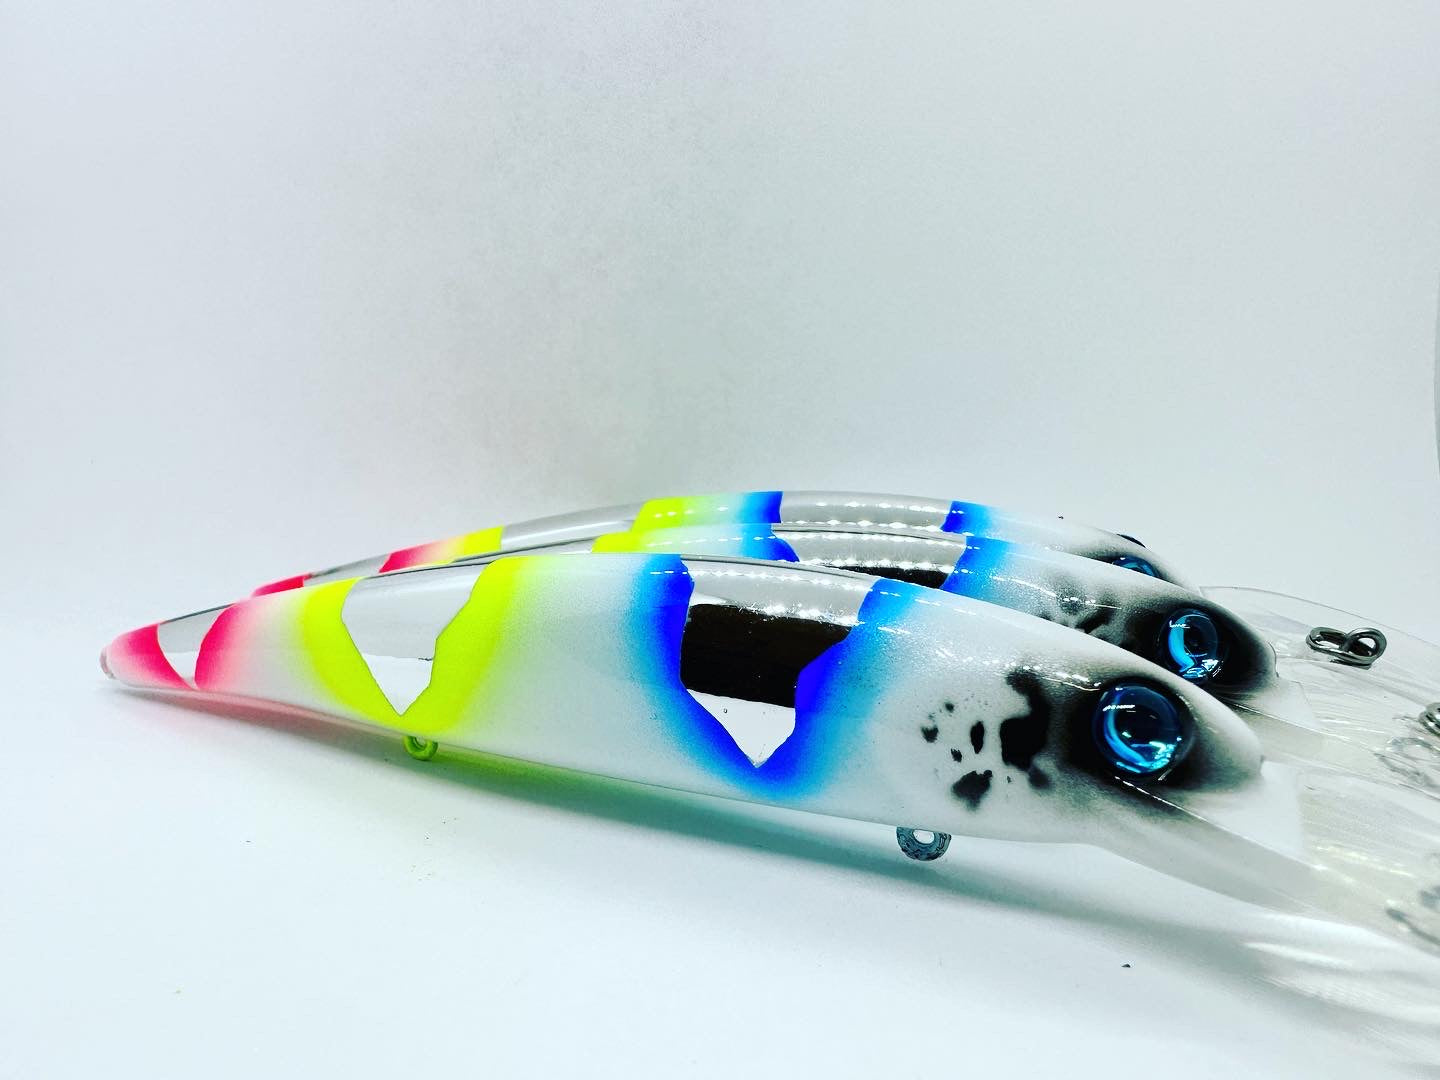 Custom Bandit Crankbait - Crayola by Vertical Jigs and Lures